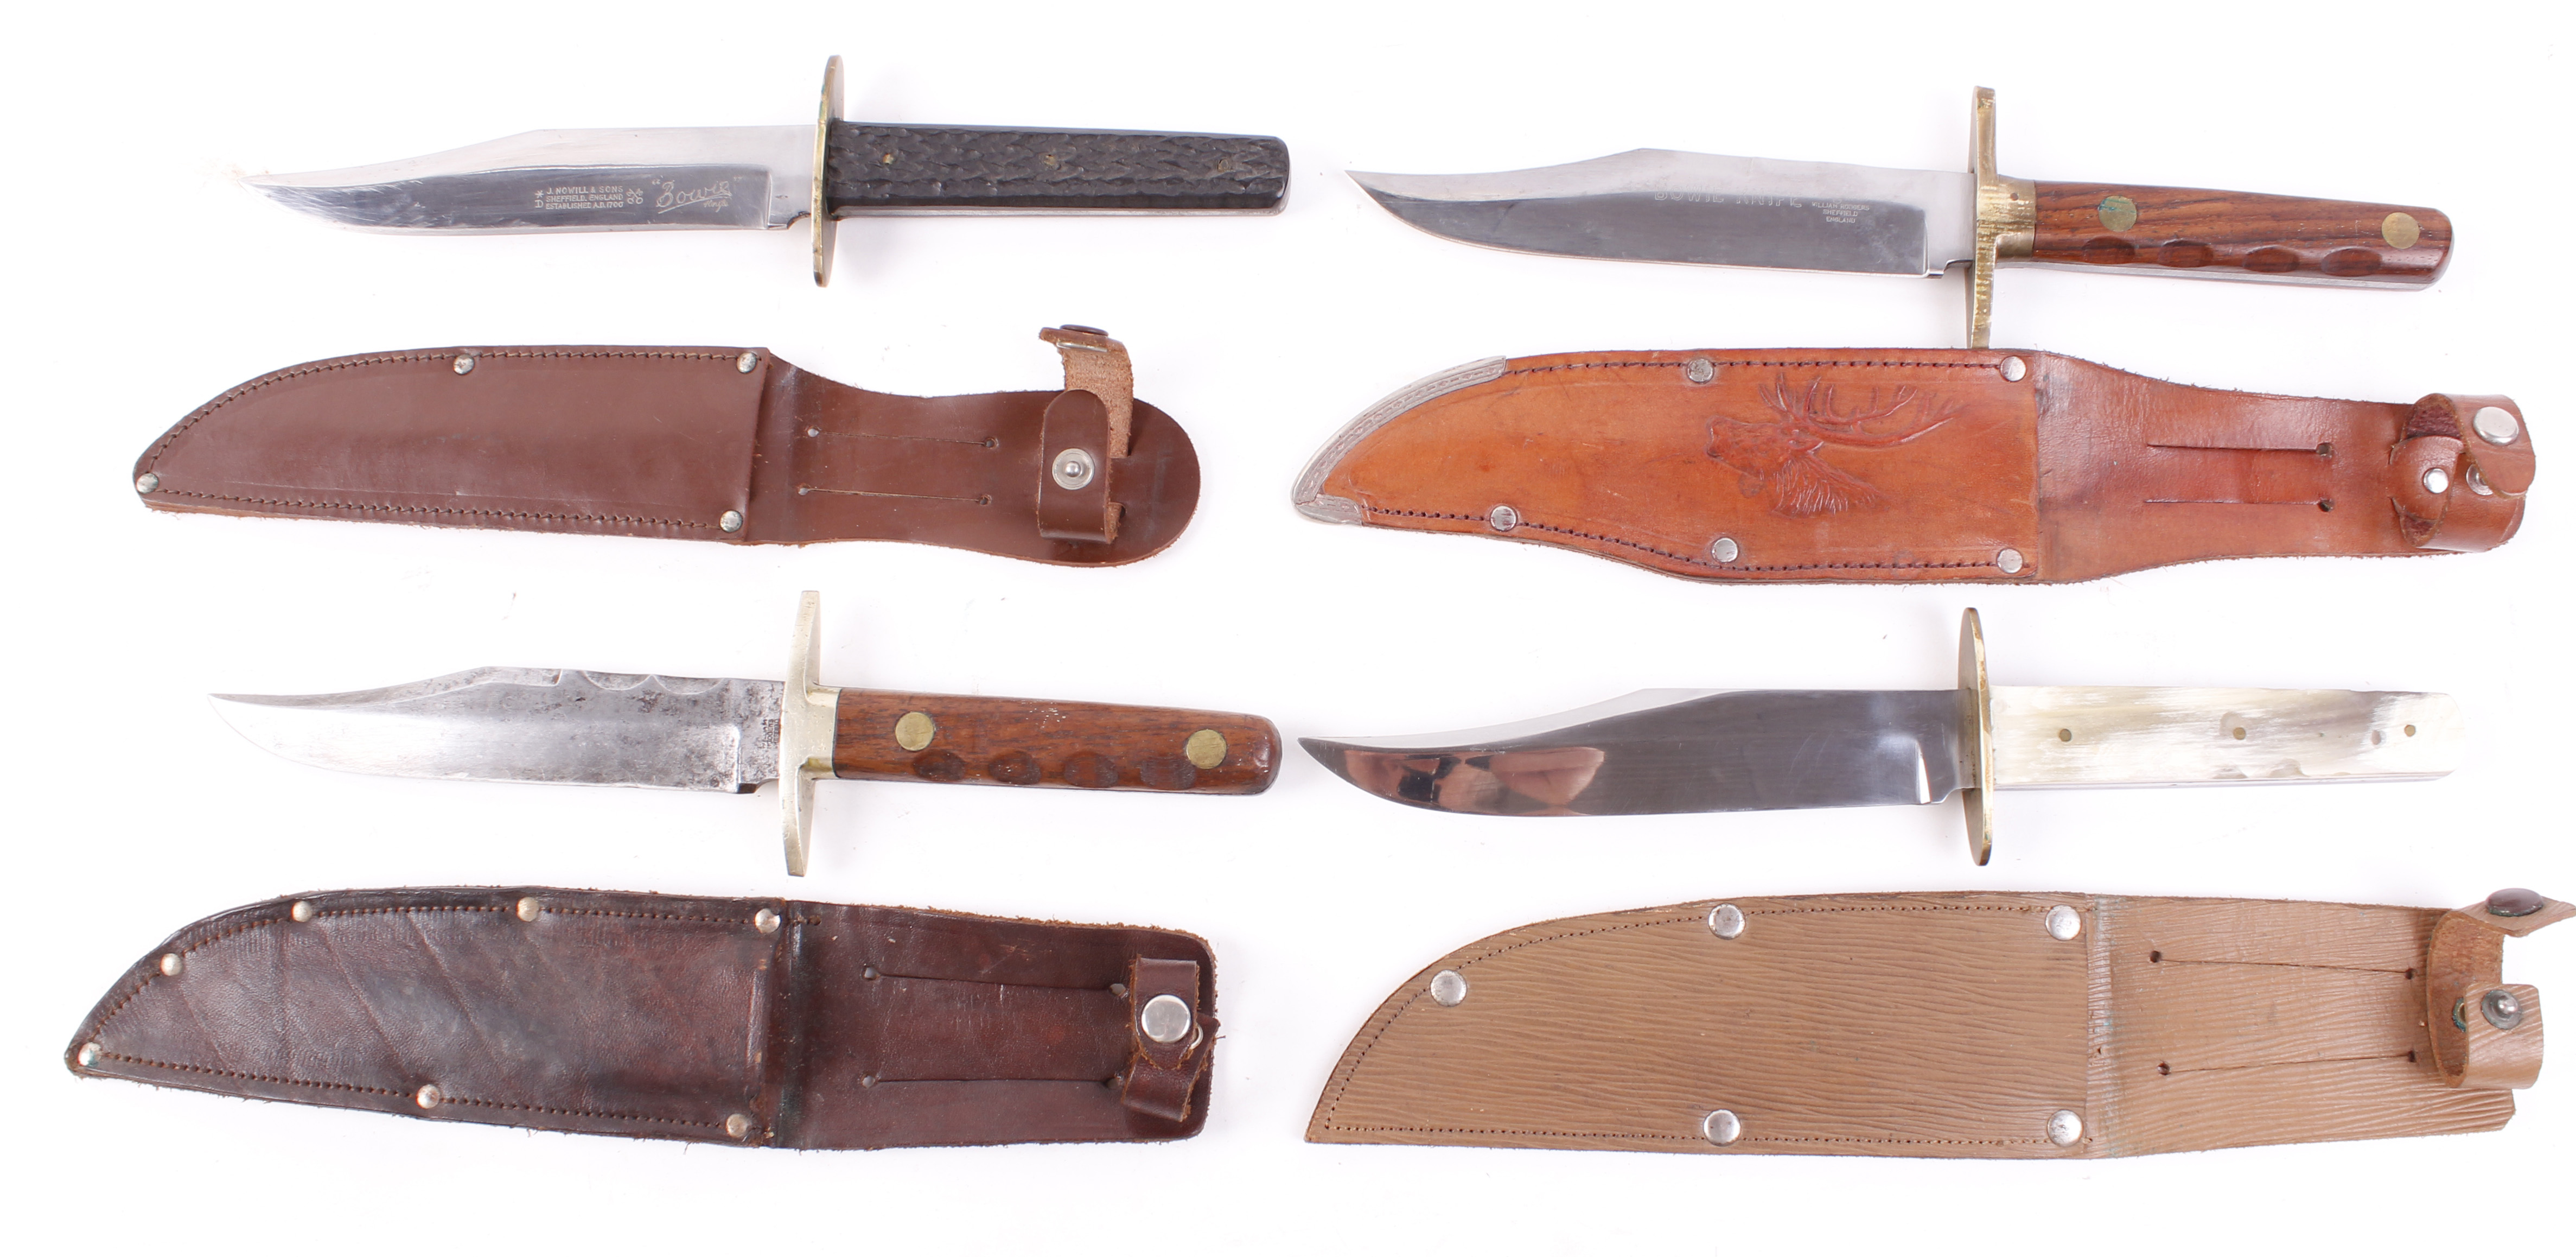 4 x 6 ins bowie knives in leather sheaths by Rodgers, Knowill and two others